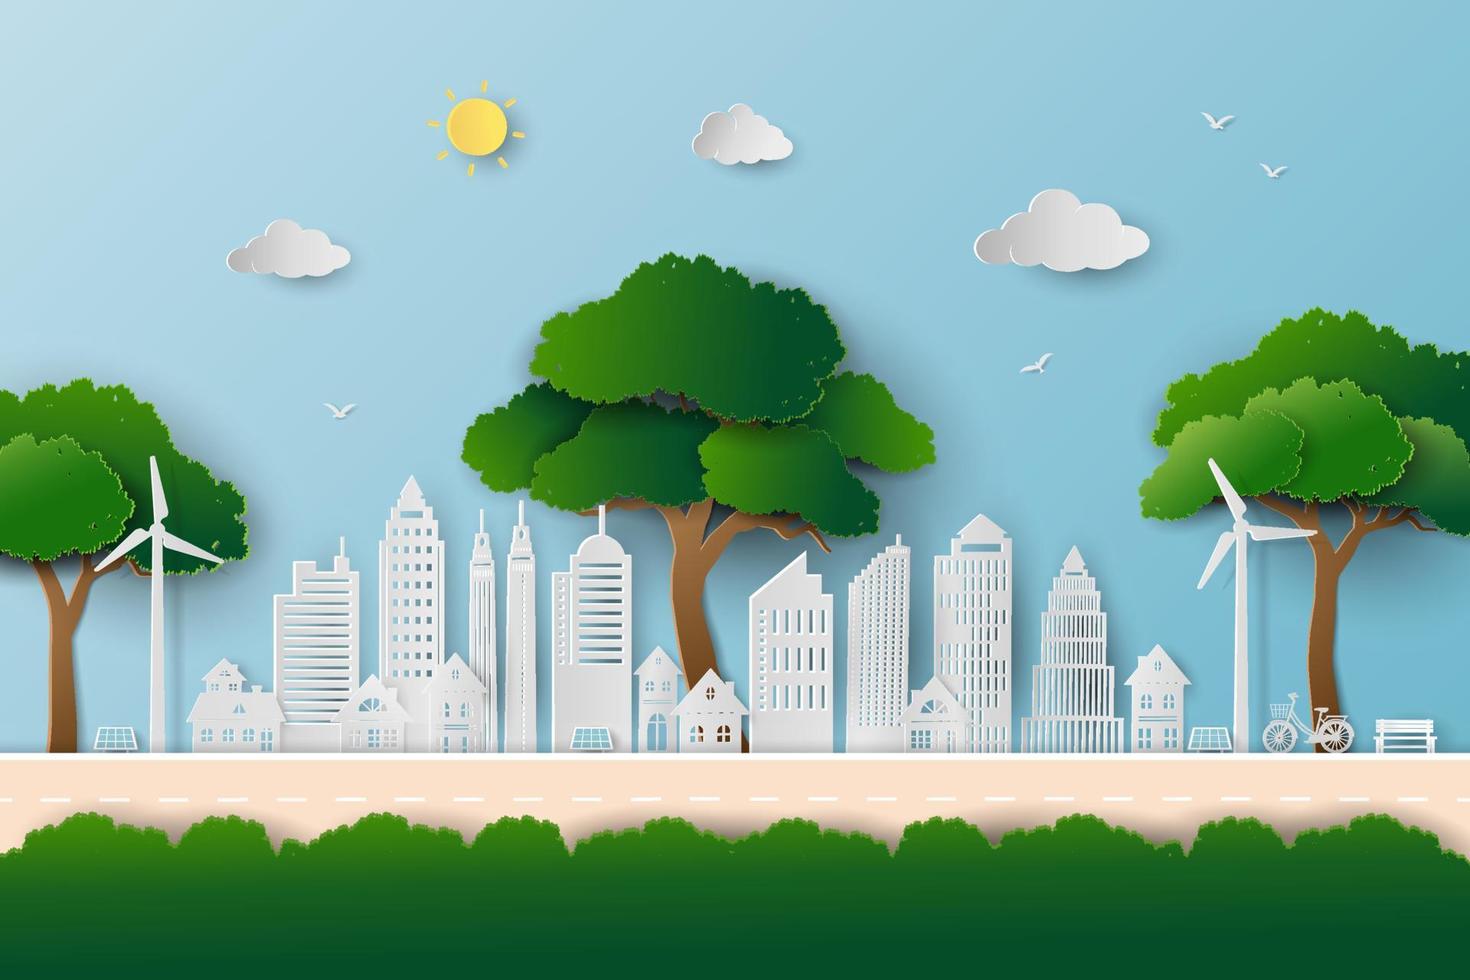 Eco friendly and save the environment conservation concept,landscape with clean city and big trees on paper art style vector